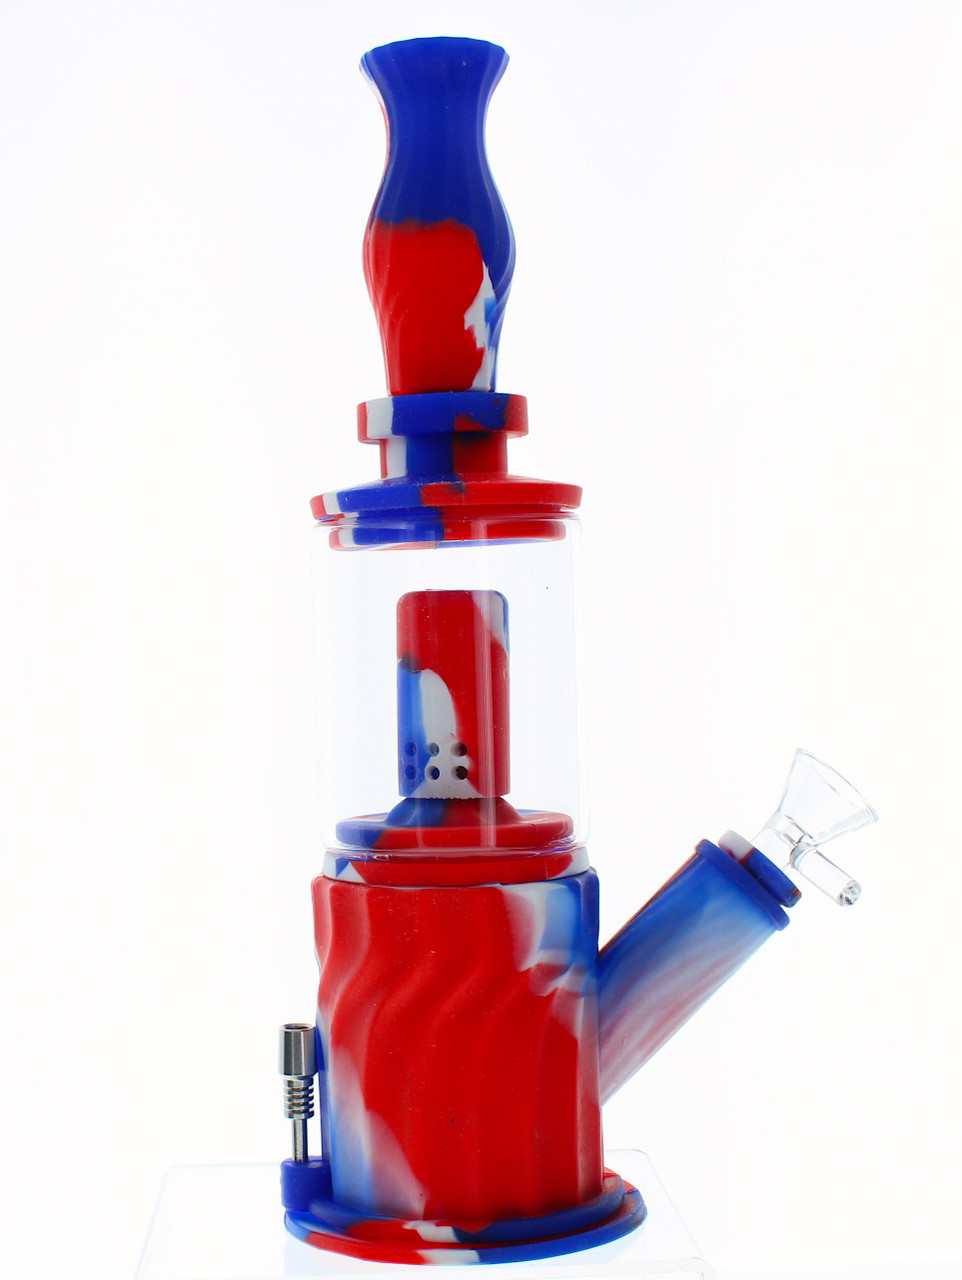 Mini Nectar Collector Kit  KING's Pipe Online Headshop